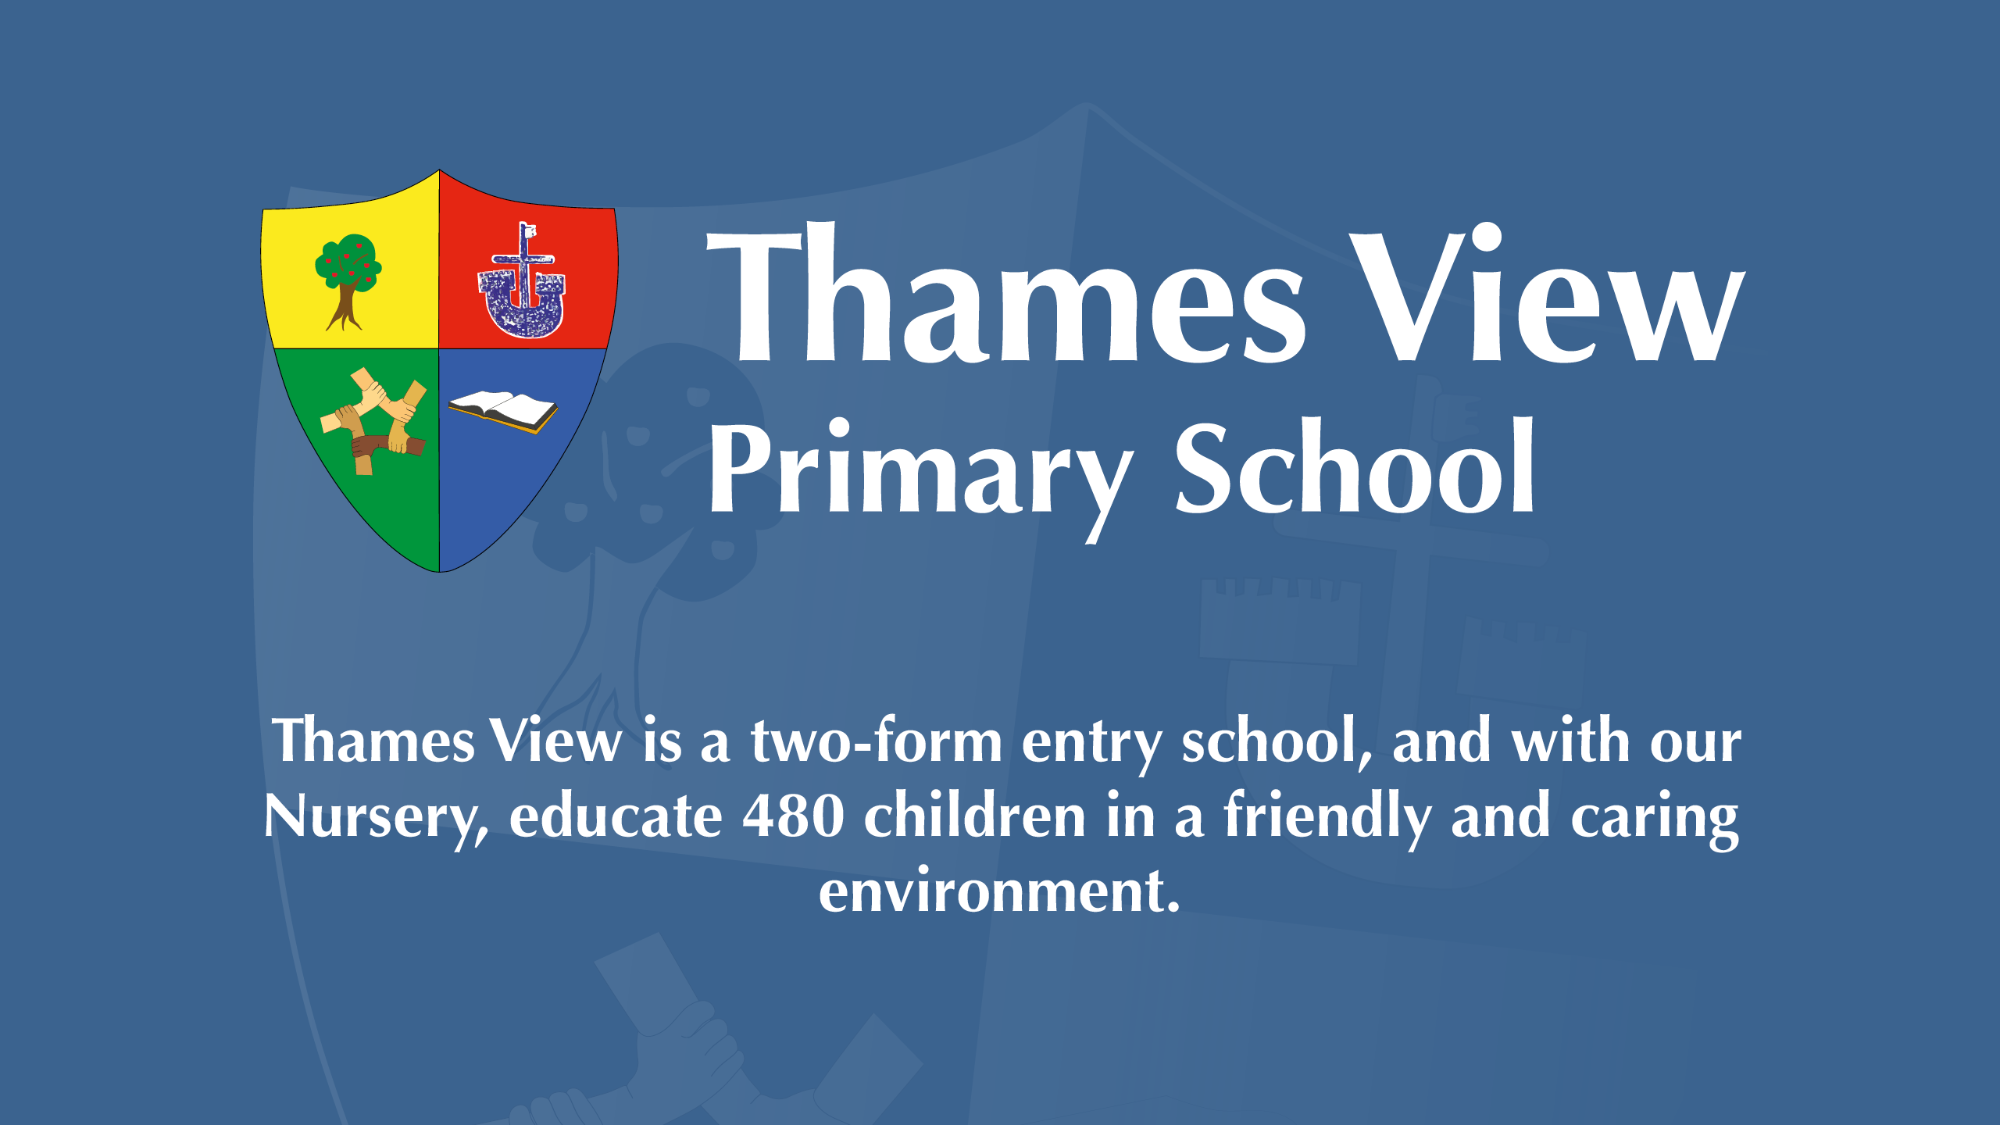 Thames View Primary School logo on a blue background.